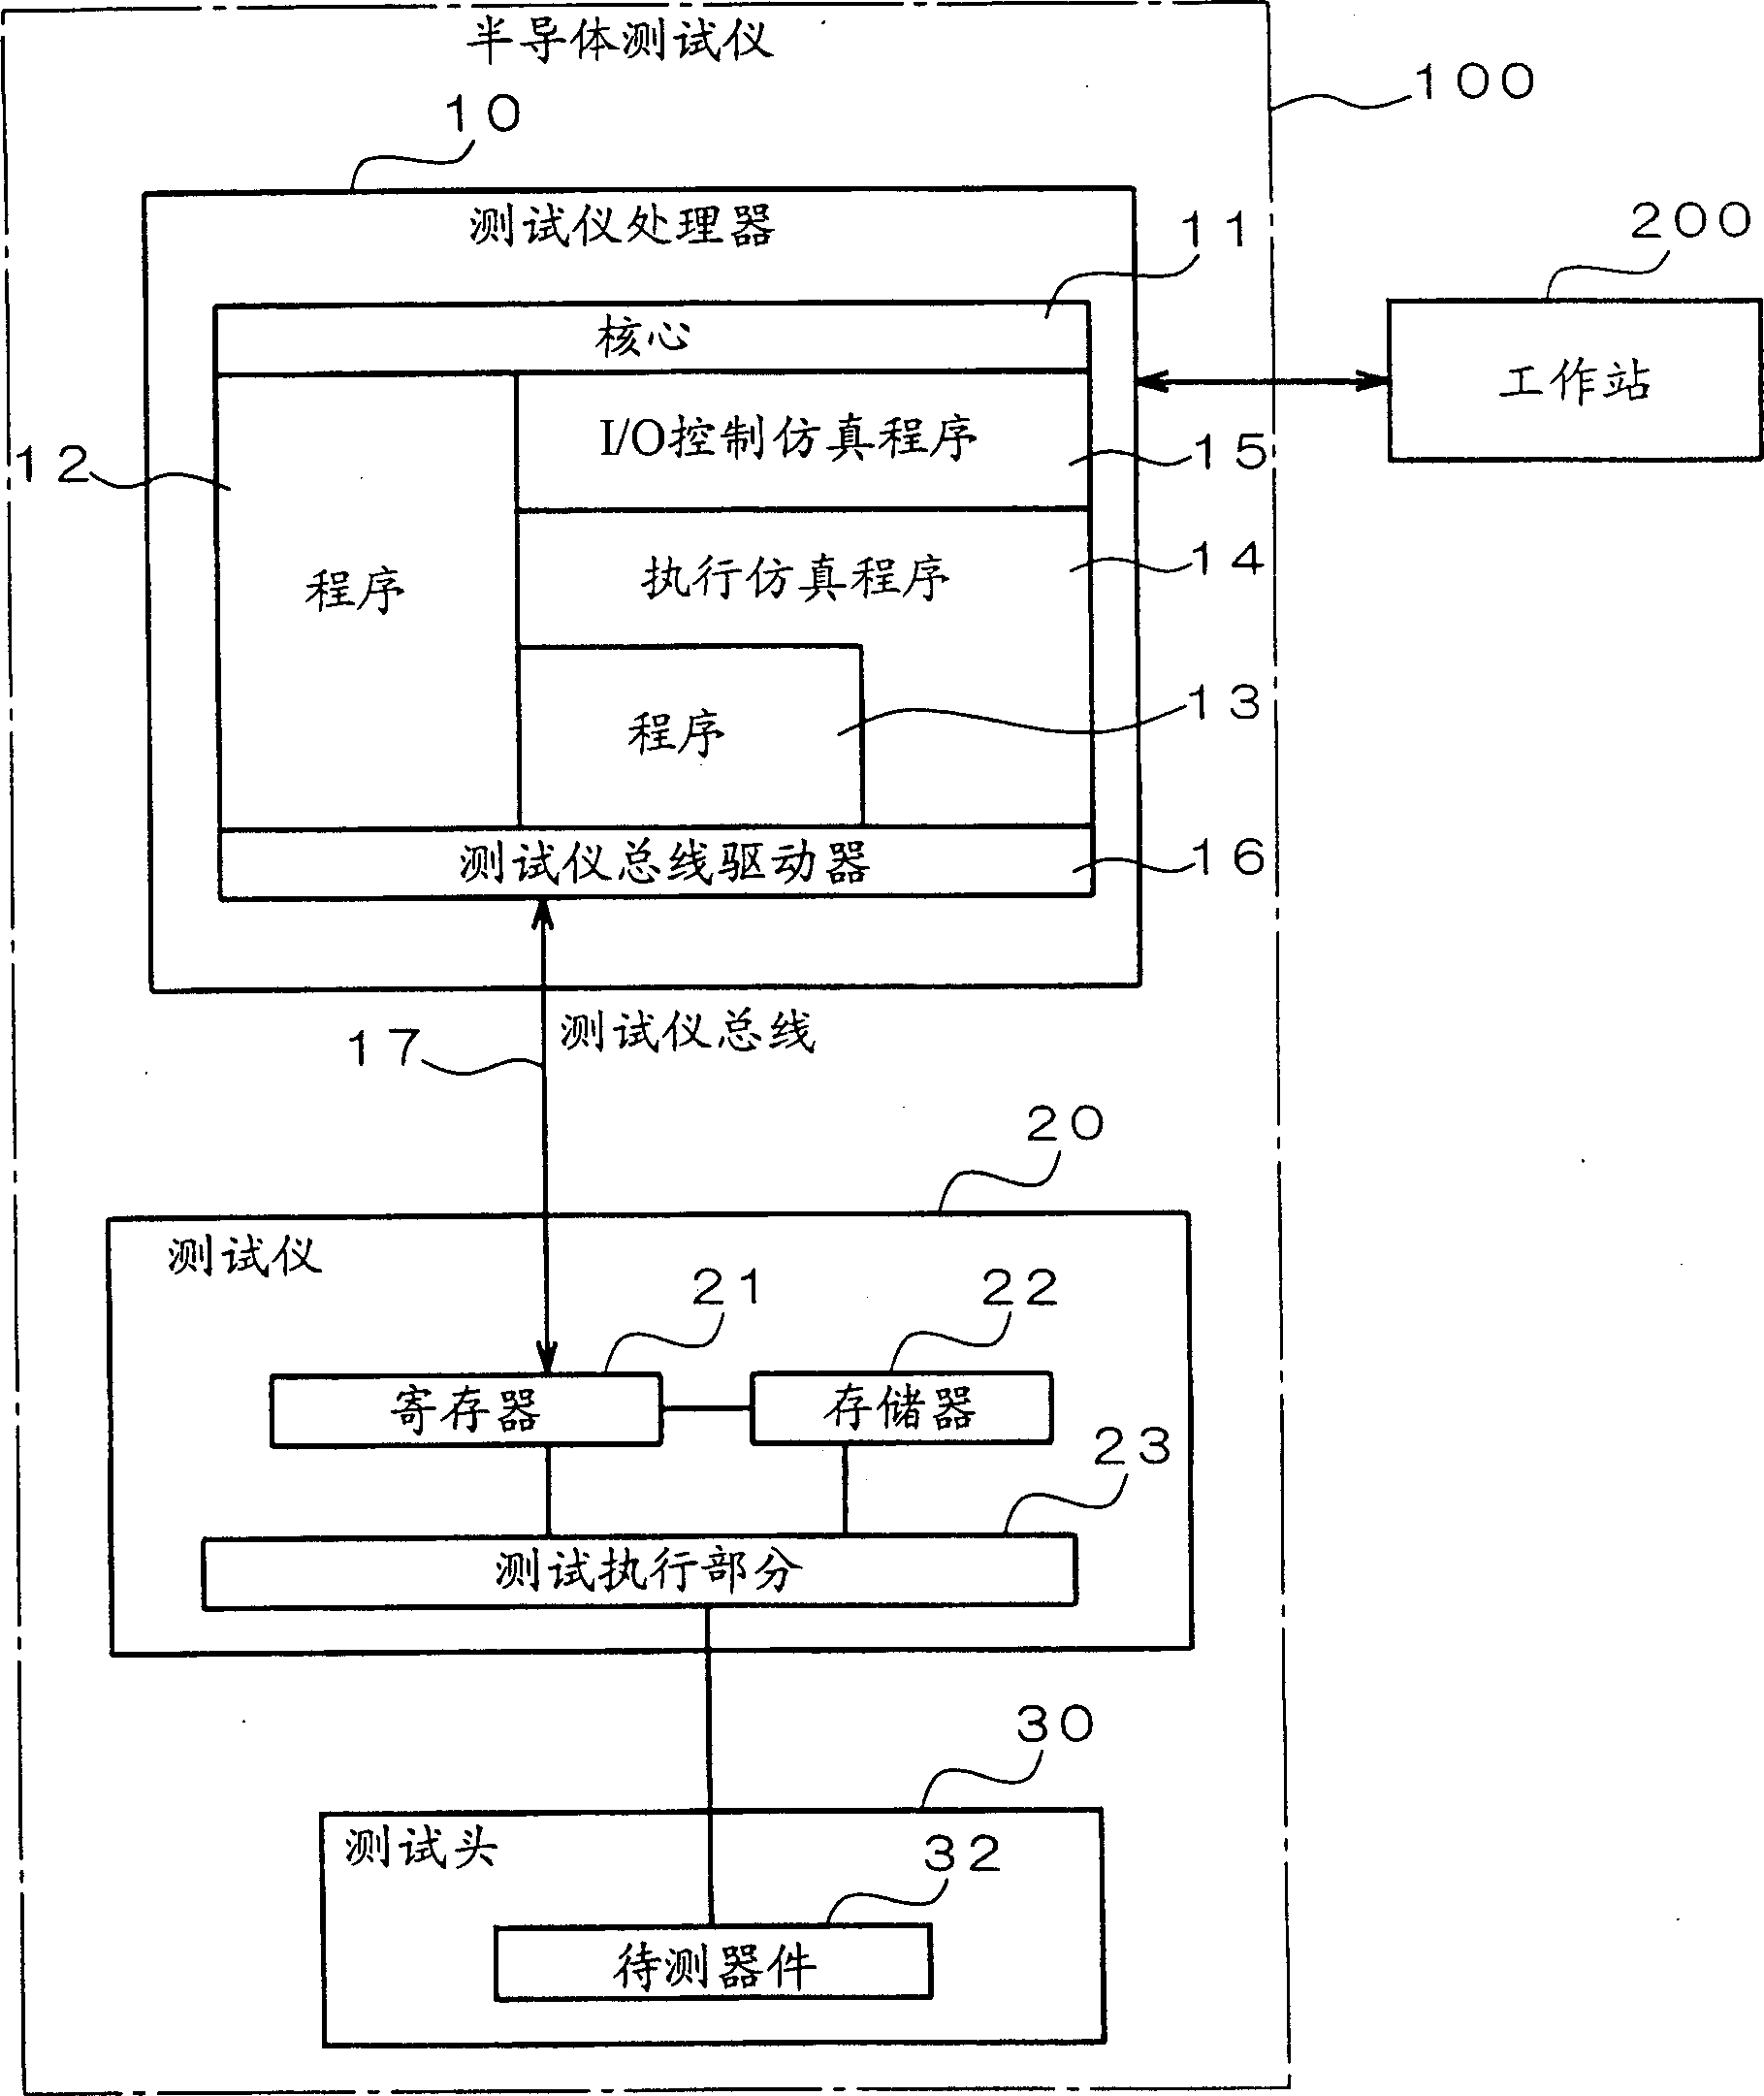 Program executive system for semi-conductor test instrument